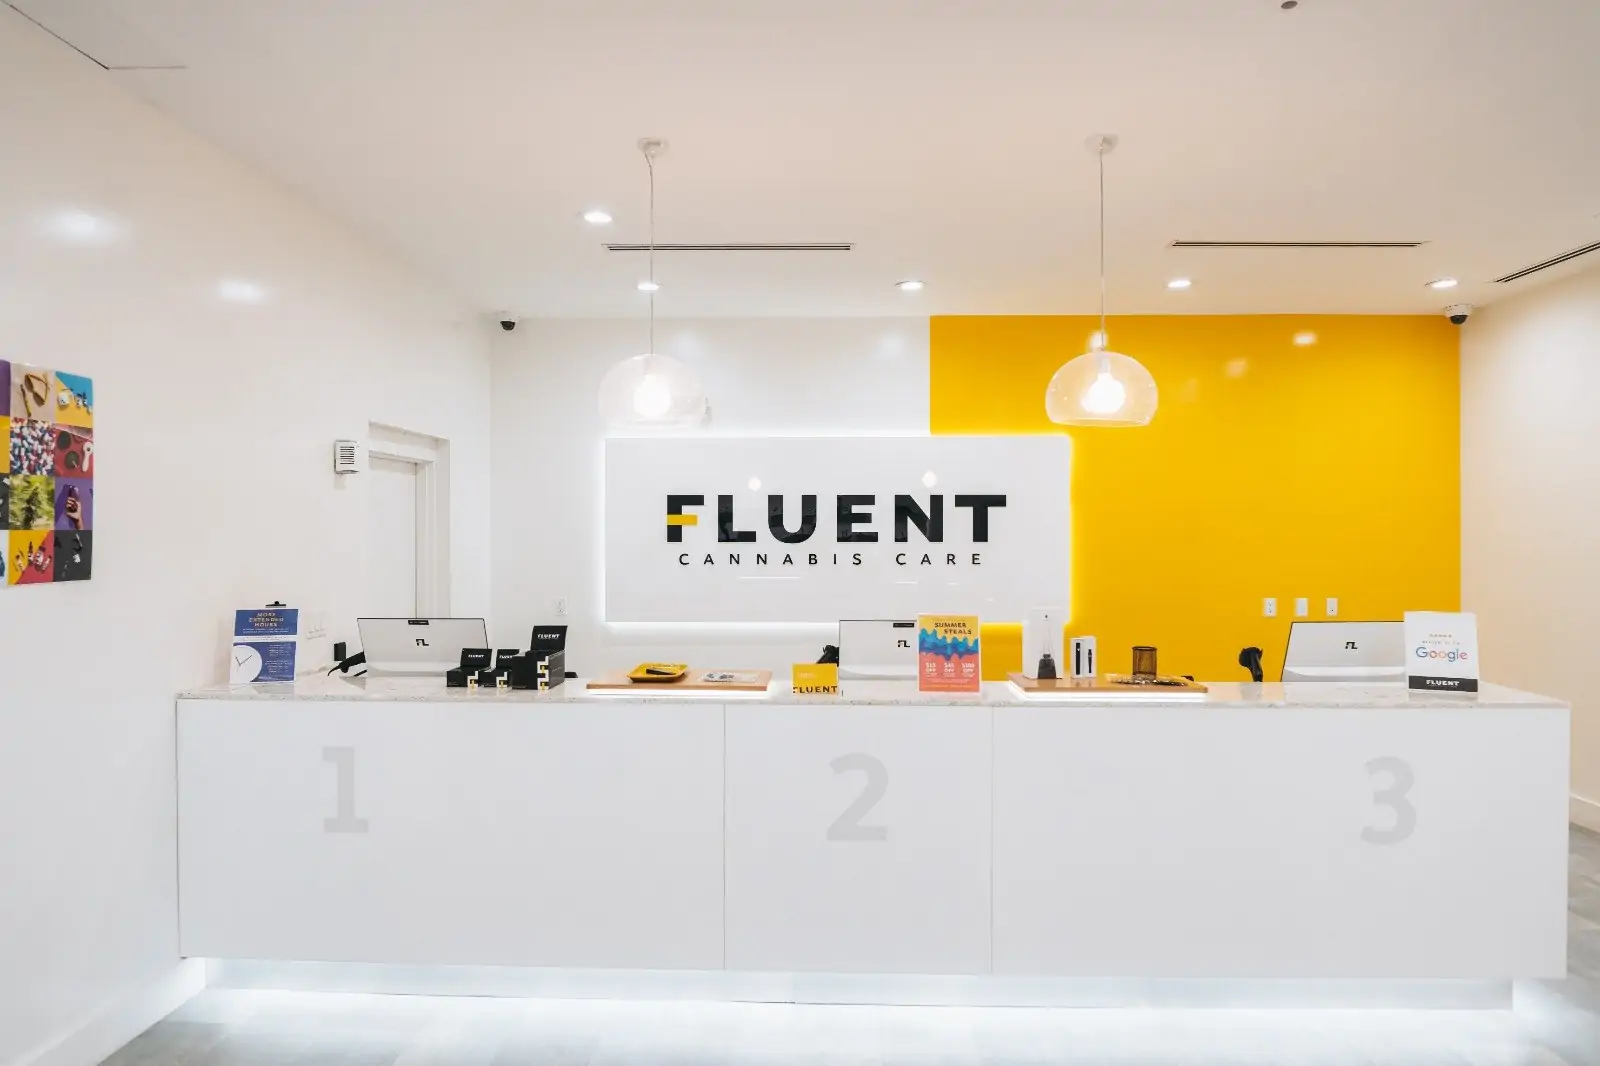 Fluent Dispensary has 21 Locations in Florida with Plans for Expansion